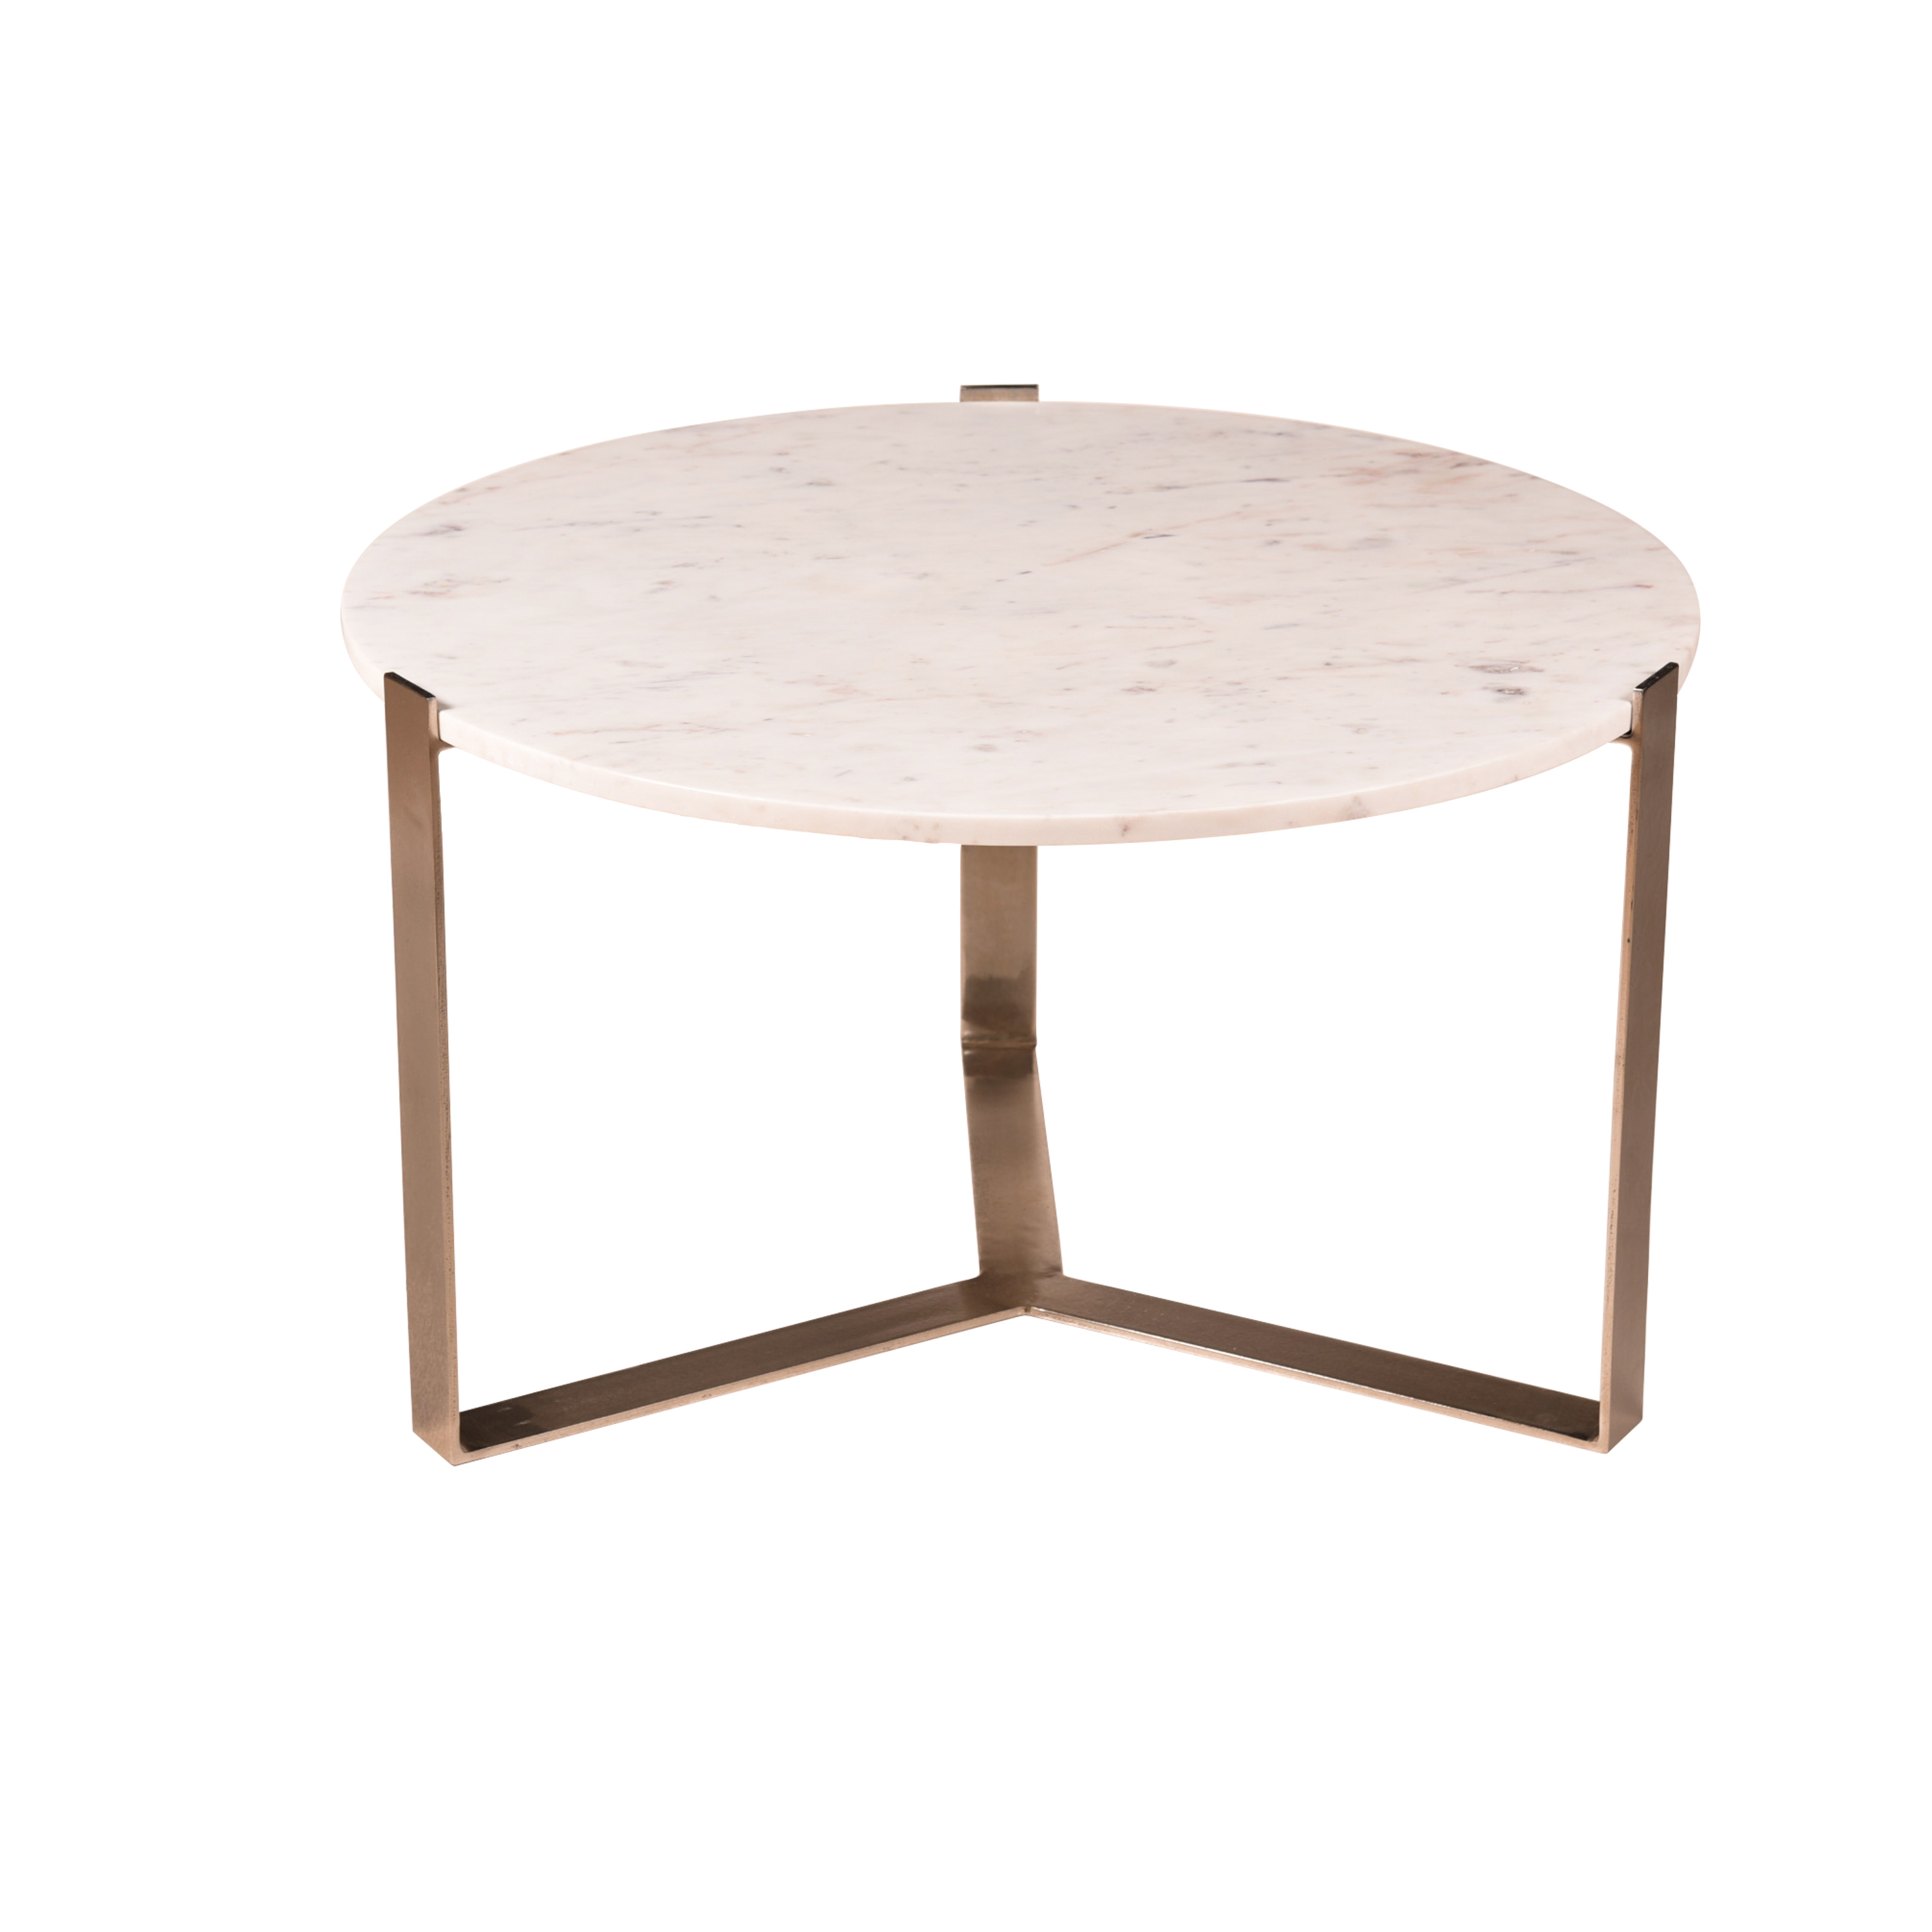 Nola Nikkel and Marble Coffee Table